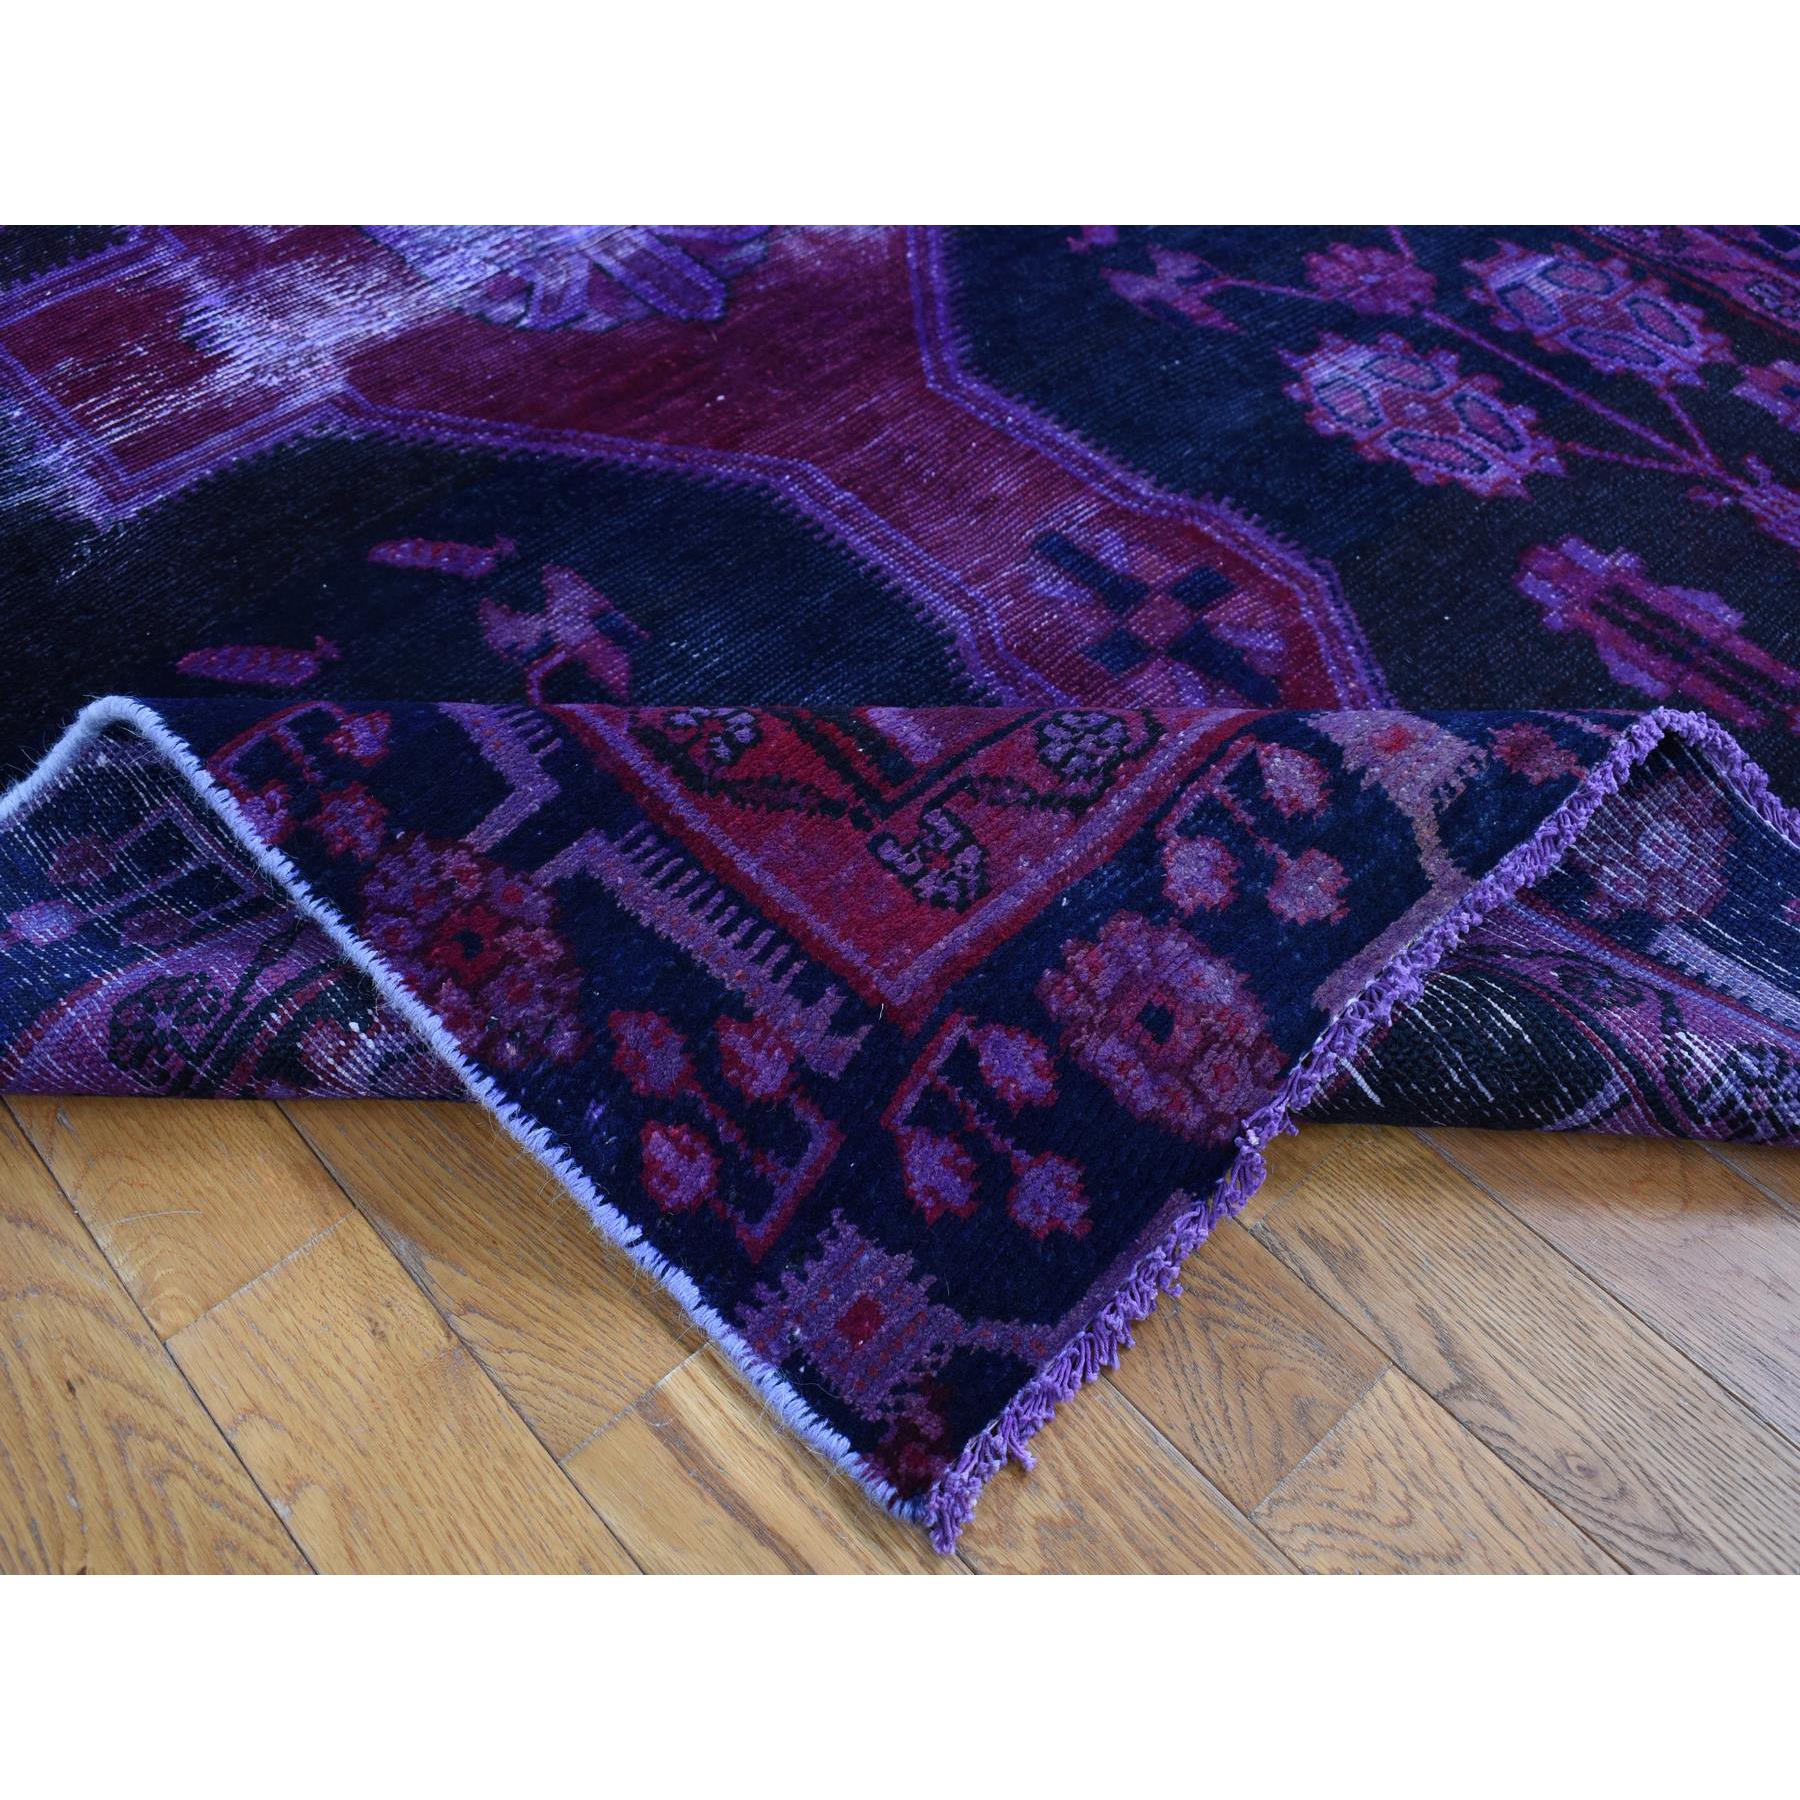  Wool Hand-Knotted Area Rug 4'6